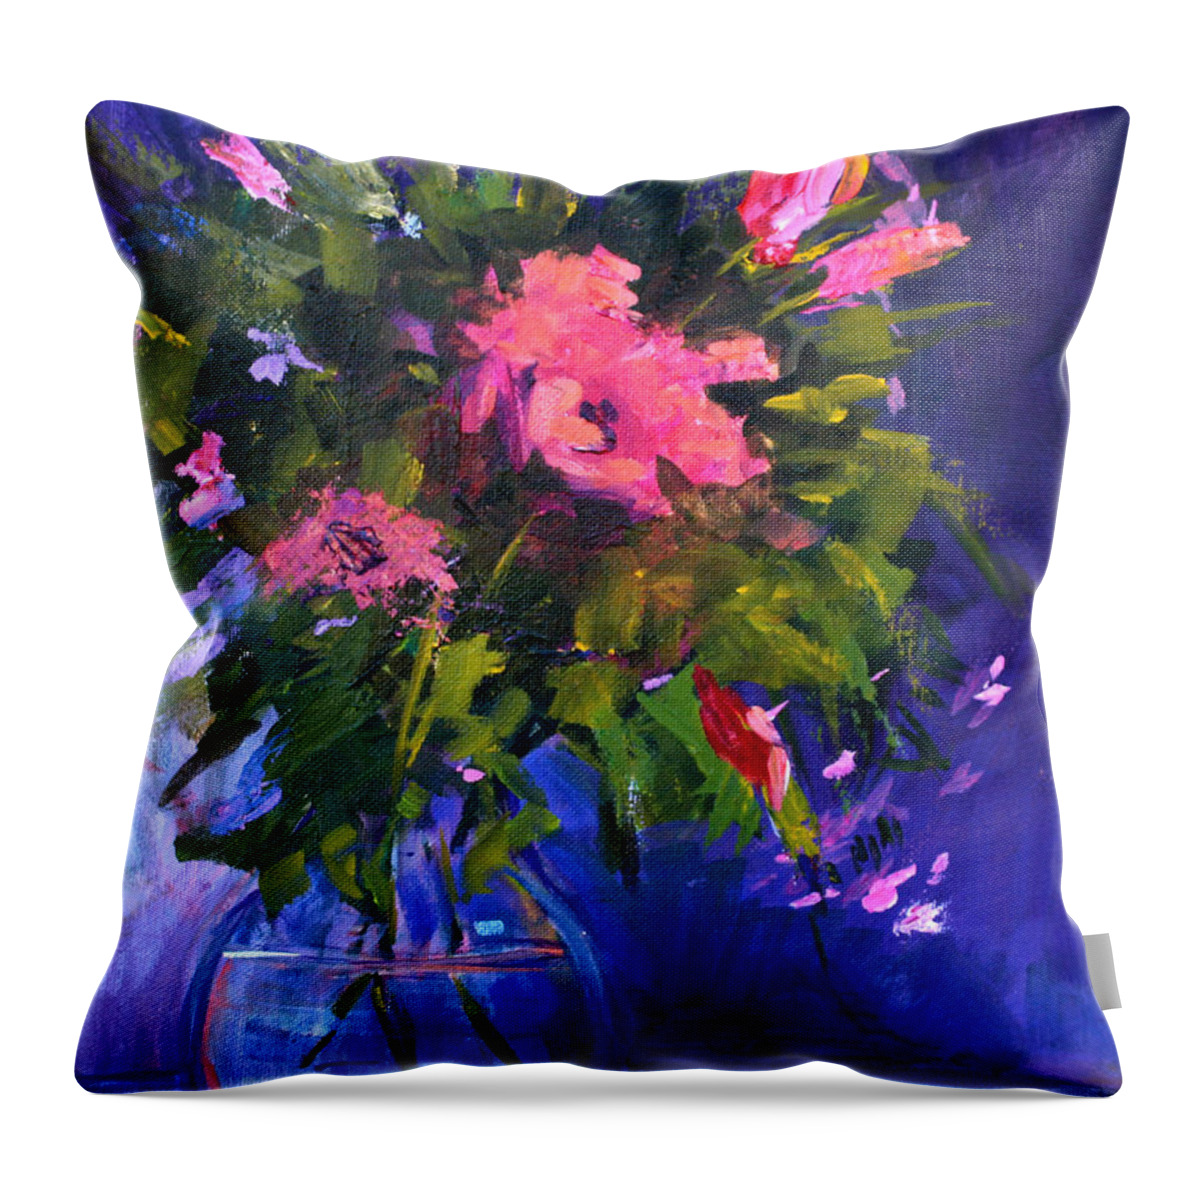 Abstract Throw Pillow featuring the painting Evening Blooms by Nancy Merkle